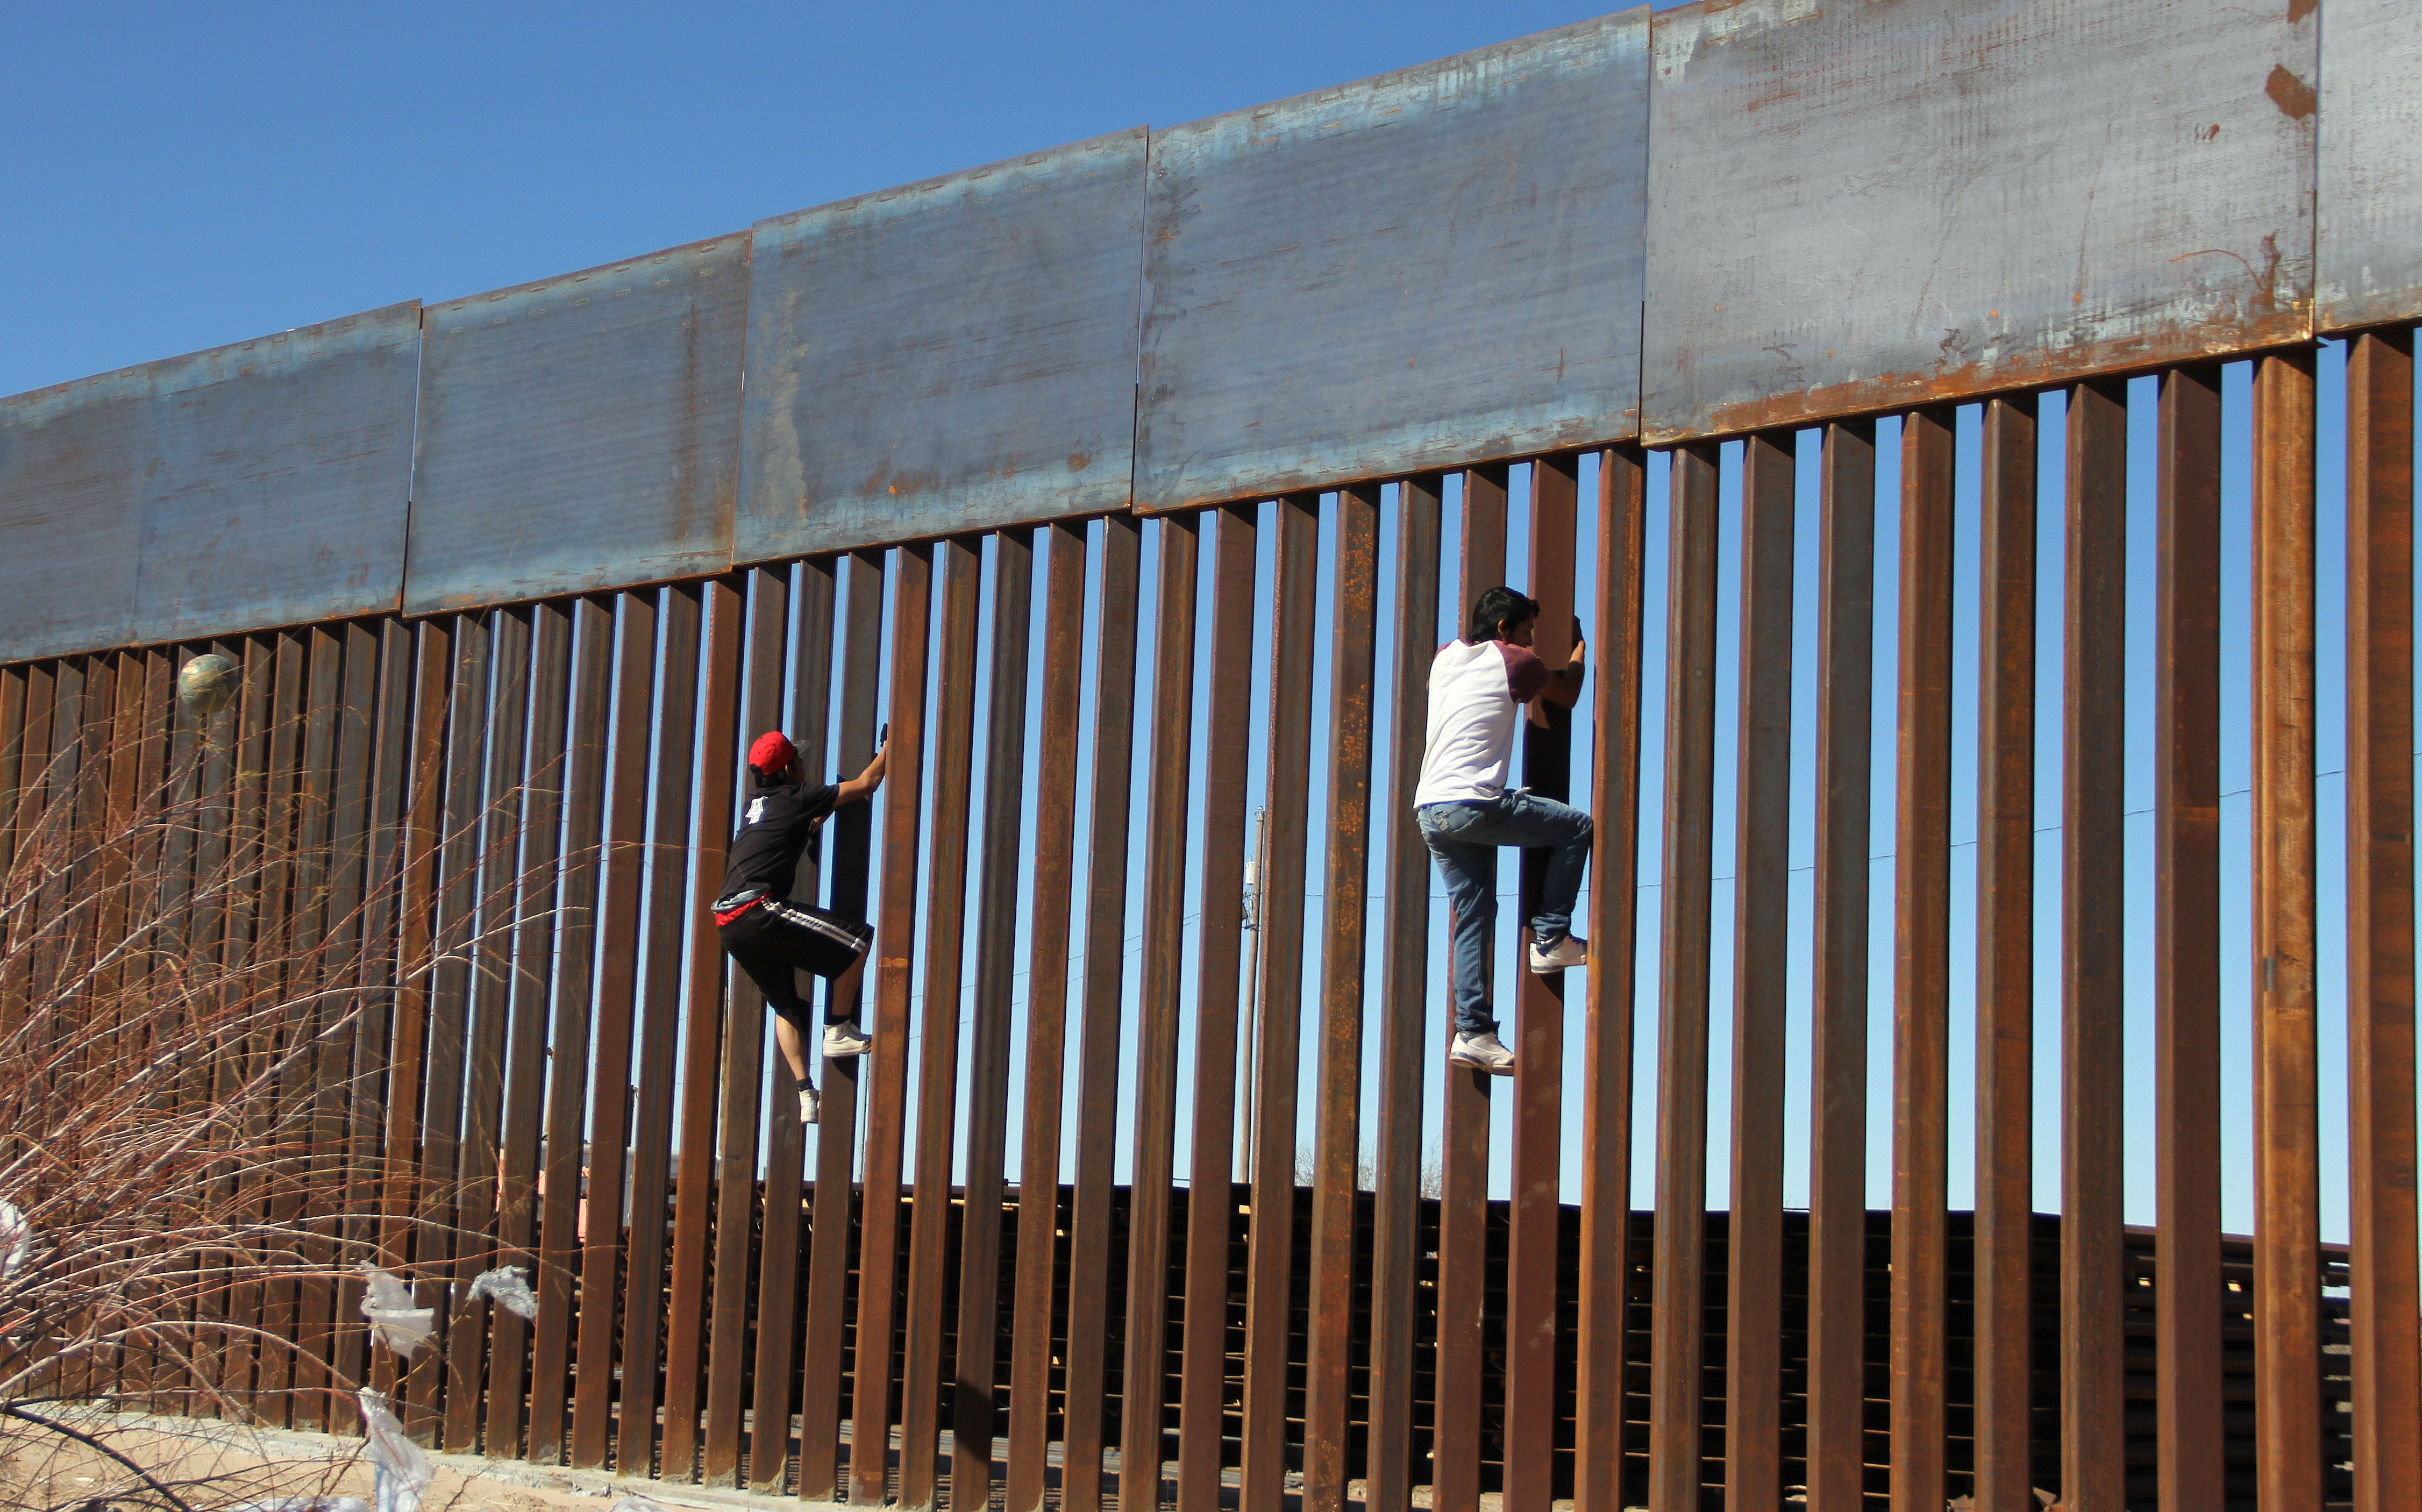 Boys play around, climbing the border division between Mexico and the US in Ciudad Juarez, Mexico on January 26, 2017. US President Donald Trump on Thursday told Mexico's president to cancel an upcoming visit to Washington if he is unwilling to foot the bill for a border wall. Escalating a cross border war of words, Trump took to Twitter to publicly upbraid Enrique Pena Nieto. "If Mexico is unwilling to pay for the badly needed wall, then it would be better to cancel the upcoming meeting." / AFP / HERIKA MARTINEZ (Photo credit should read HERIKA MARTINEZ/AFP/Getty Images)